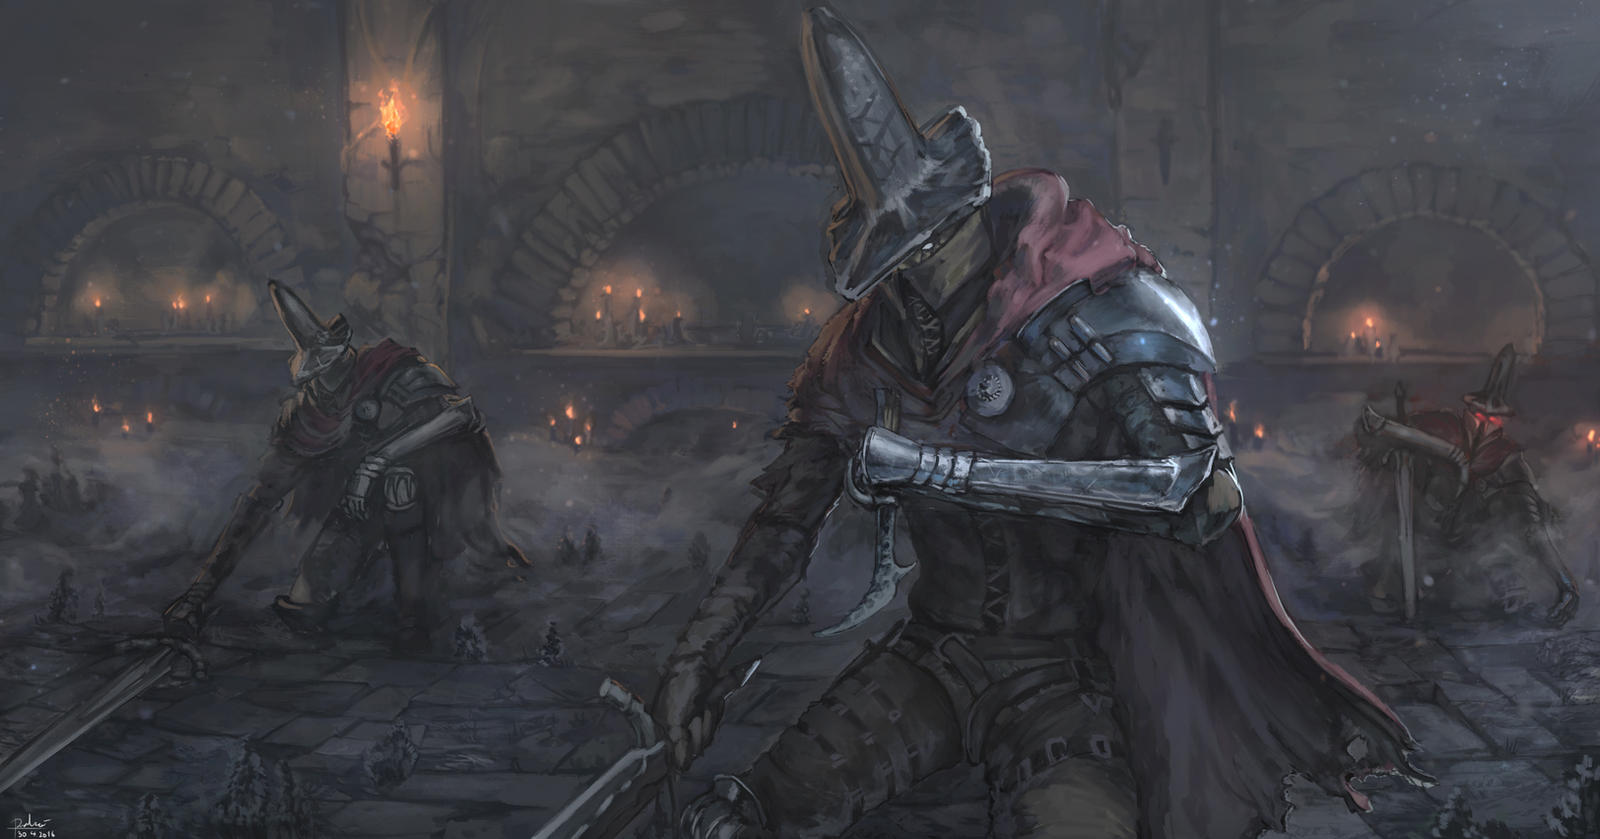 The initial flame dwindles, setting up the beginning of the story: Dark Souls